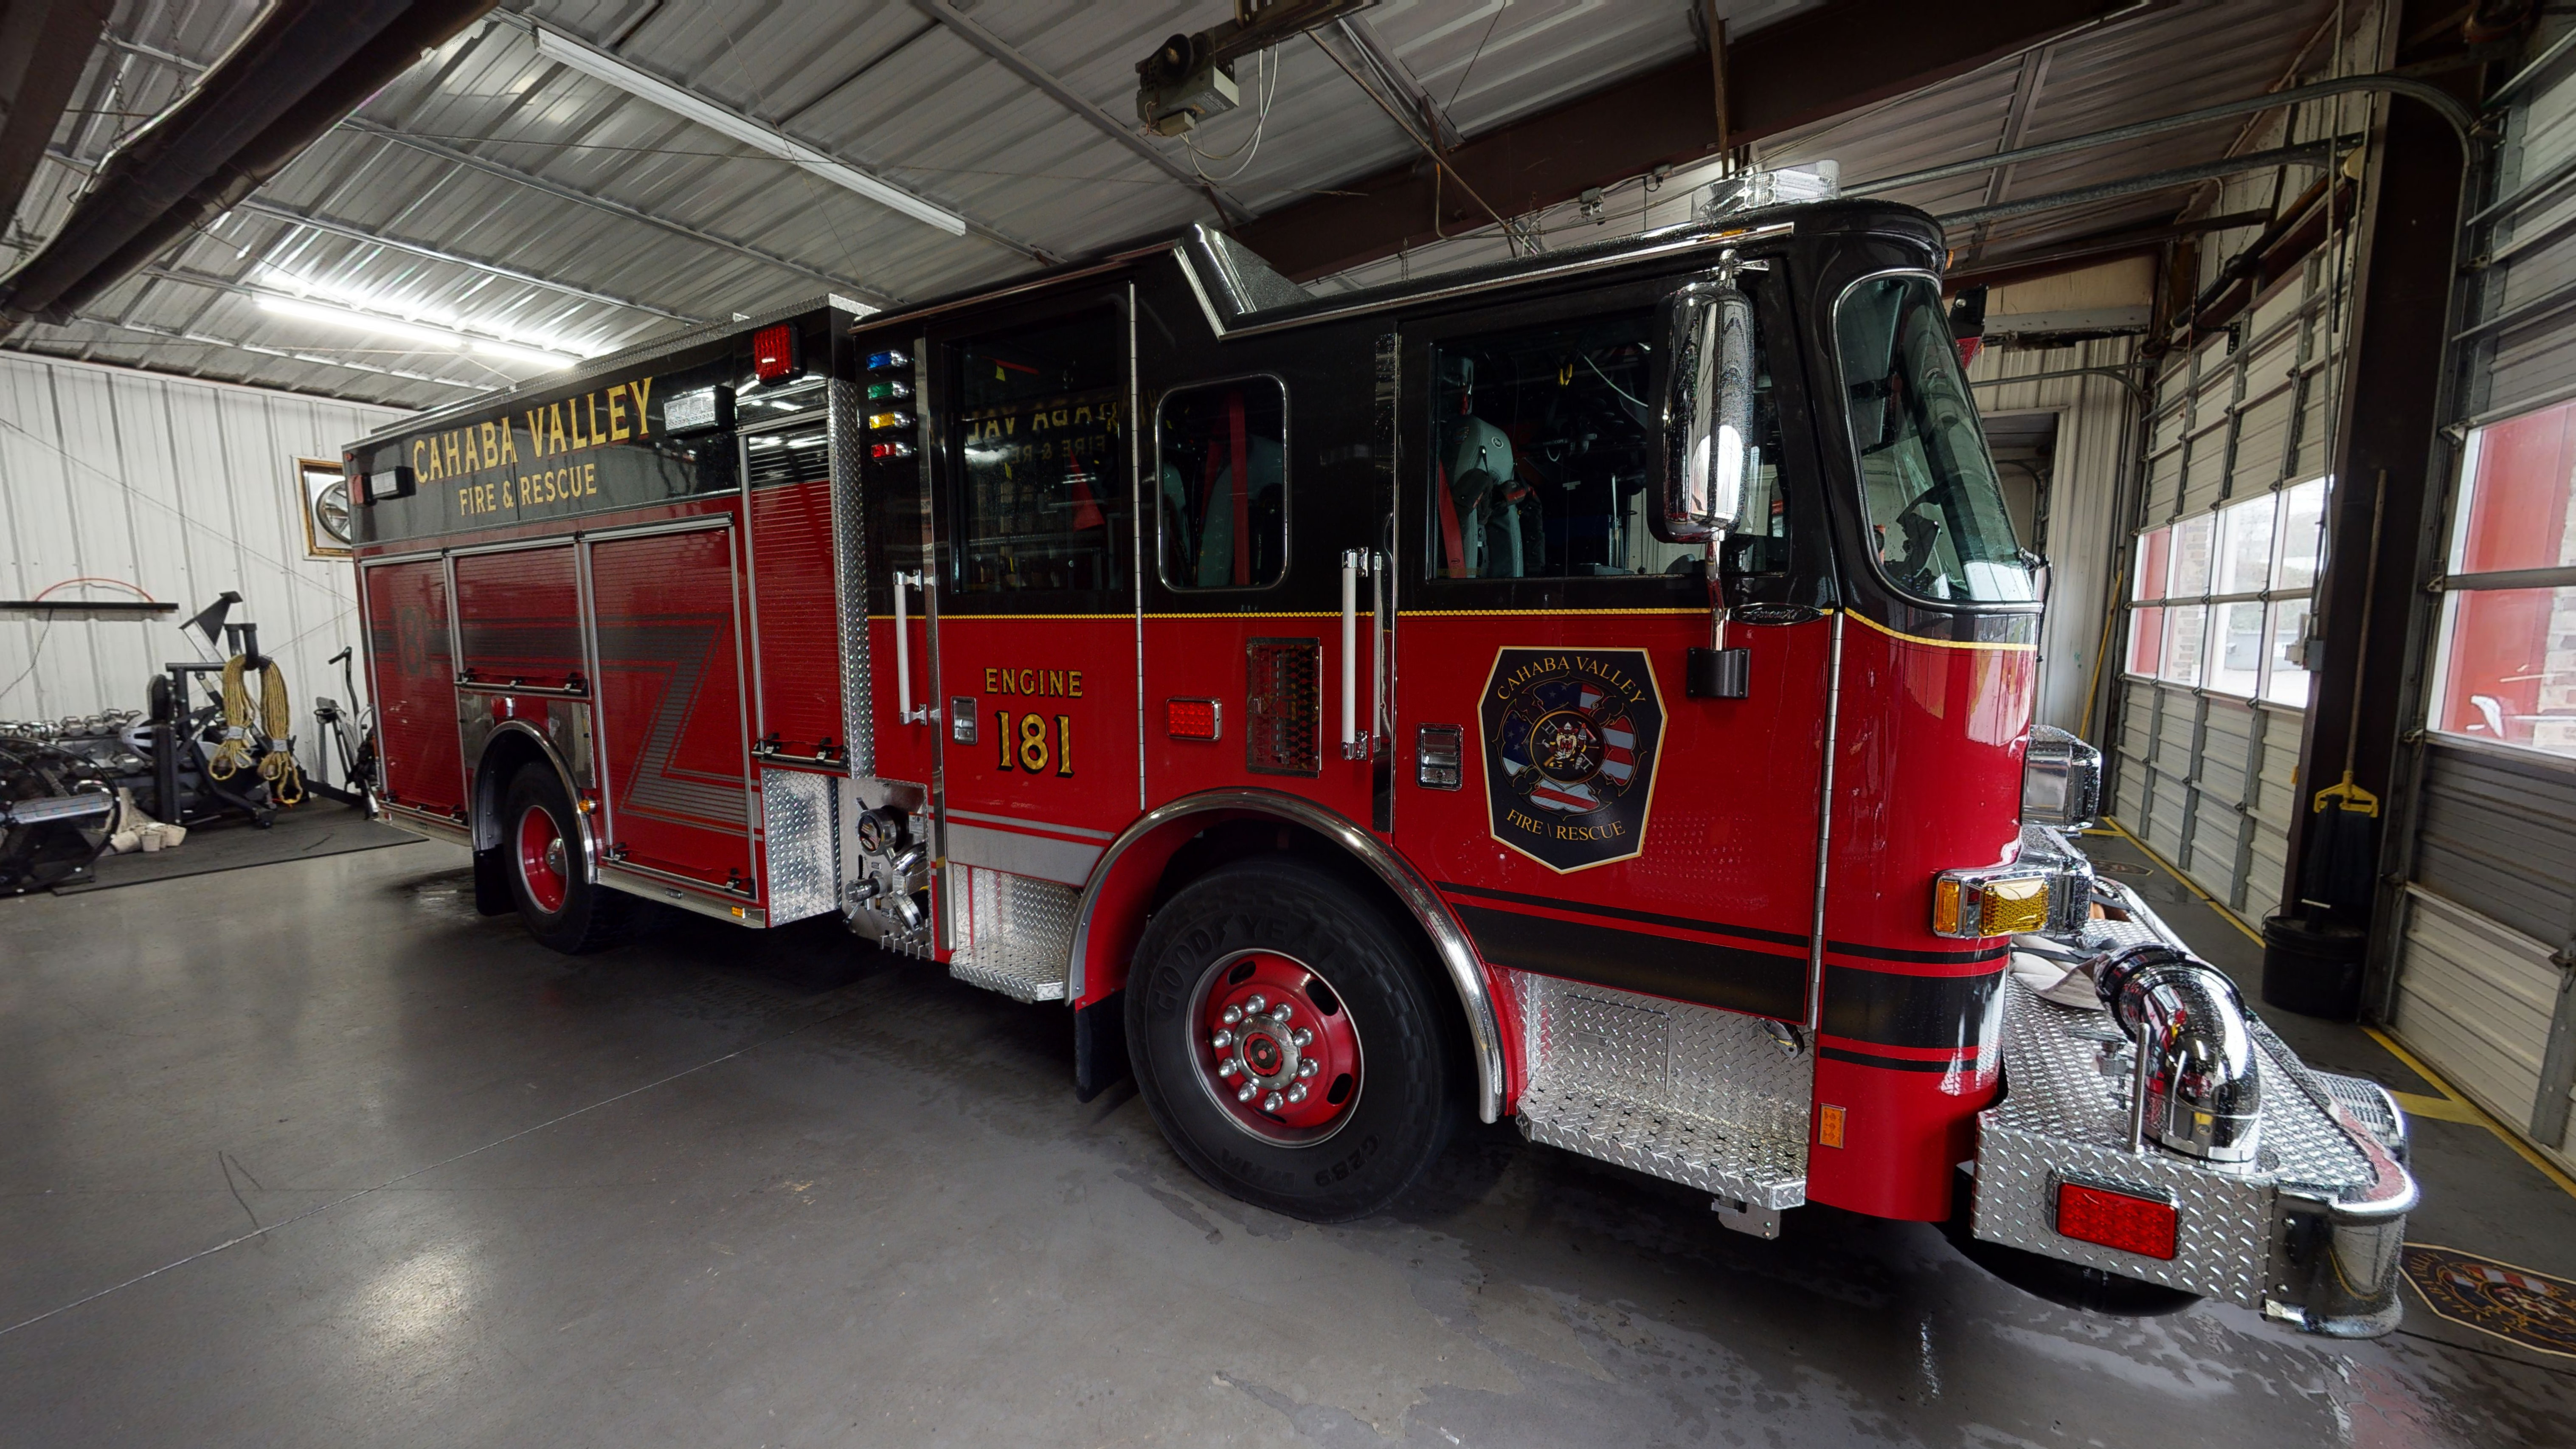 1_Cahaba-Valley-Fire-District-Engine-181-06082021_111705